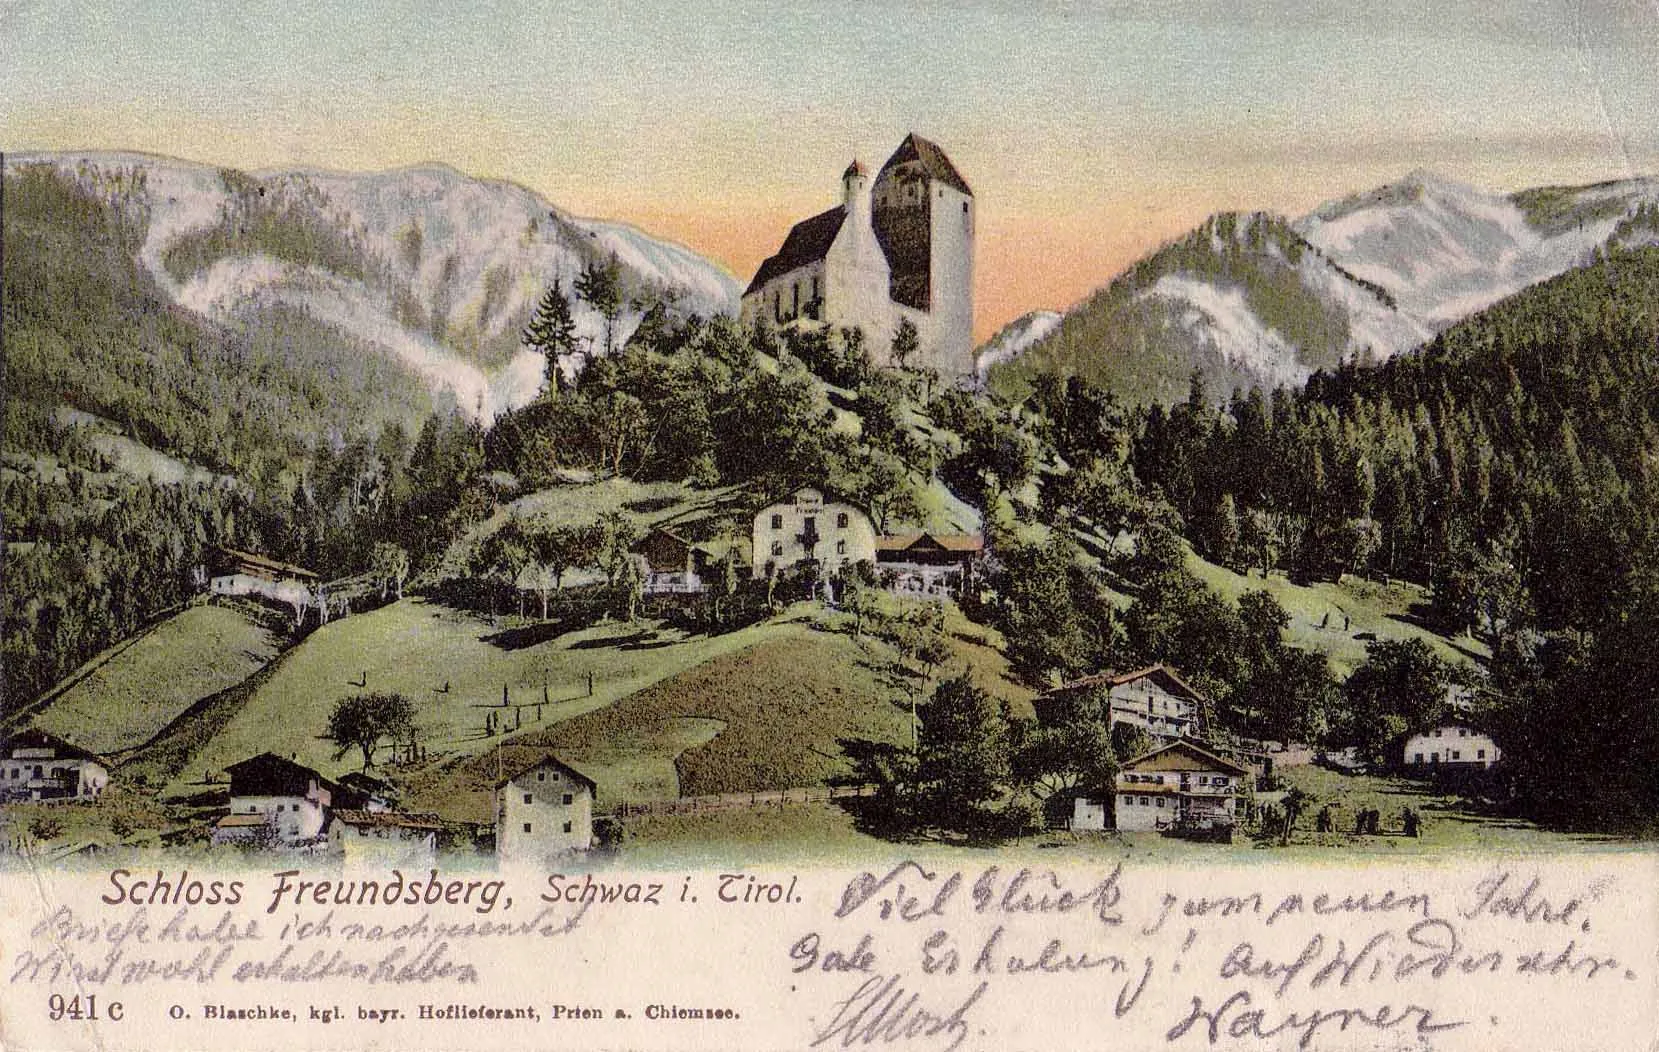 Photo showing: Lithography, about 1900. Note: Postcards were introduced to Austro-Hungarian monarchy by october 1, 1869, but first edited by postal authority only. By 1872, private editors were allowed to produce and sell postcards and started producing picture postcards from there on. Until 1905, only the frontside of the card was allowed to contain some personal message – the backside was reserved for the address. Therefore, blank space for the message is foreseen on the frontside of those early period's items.